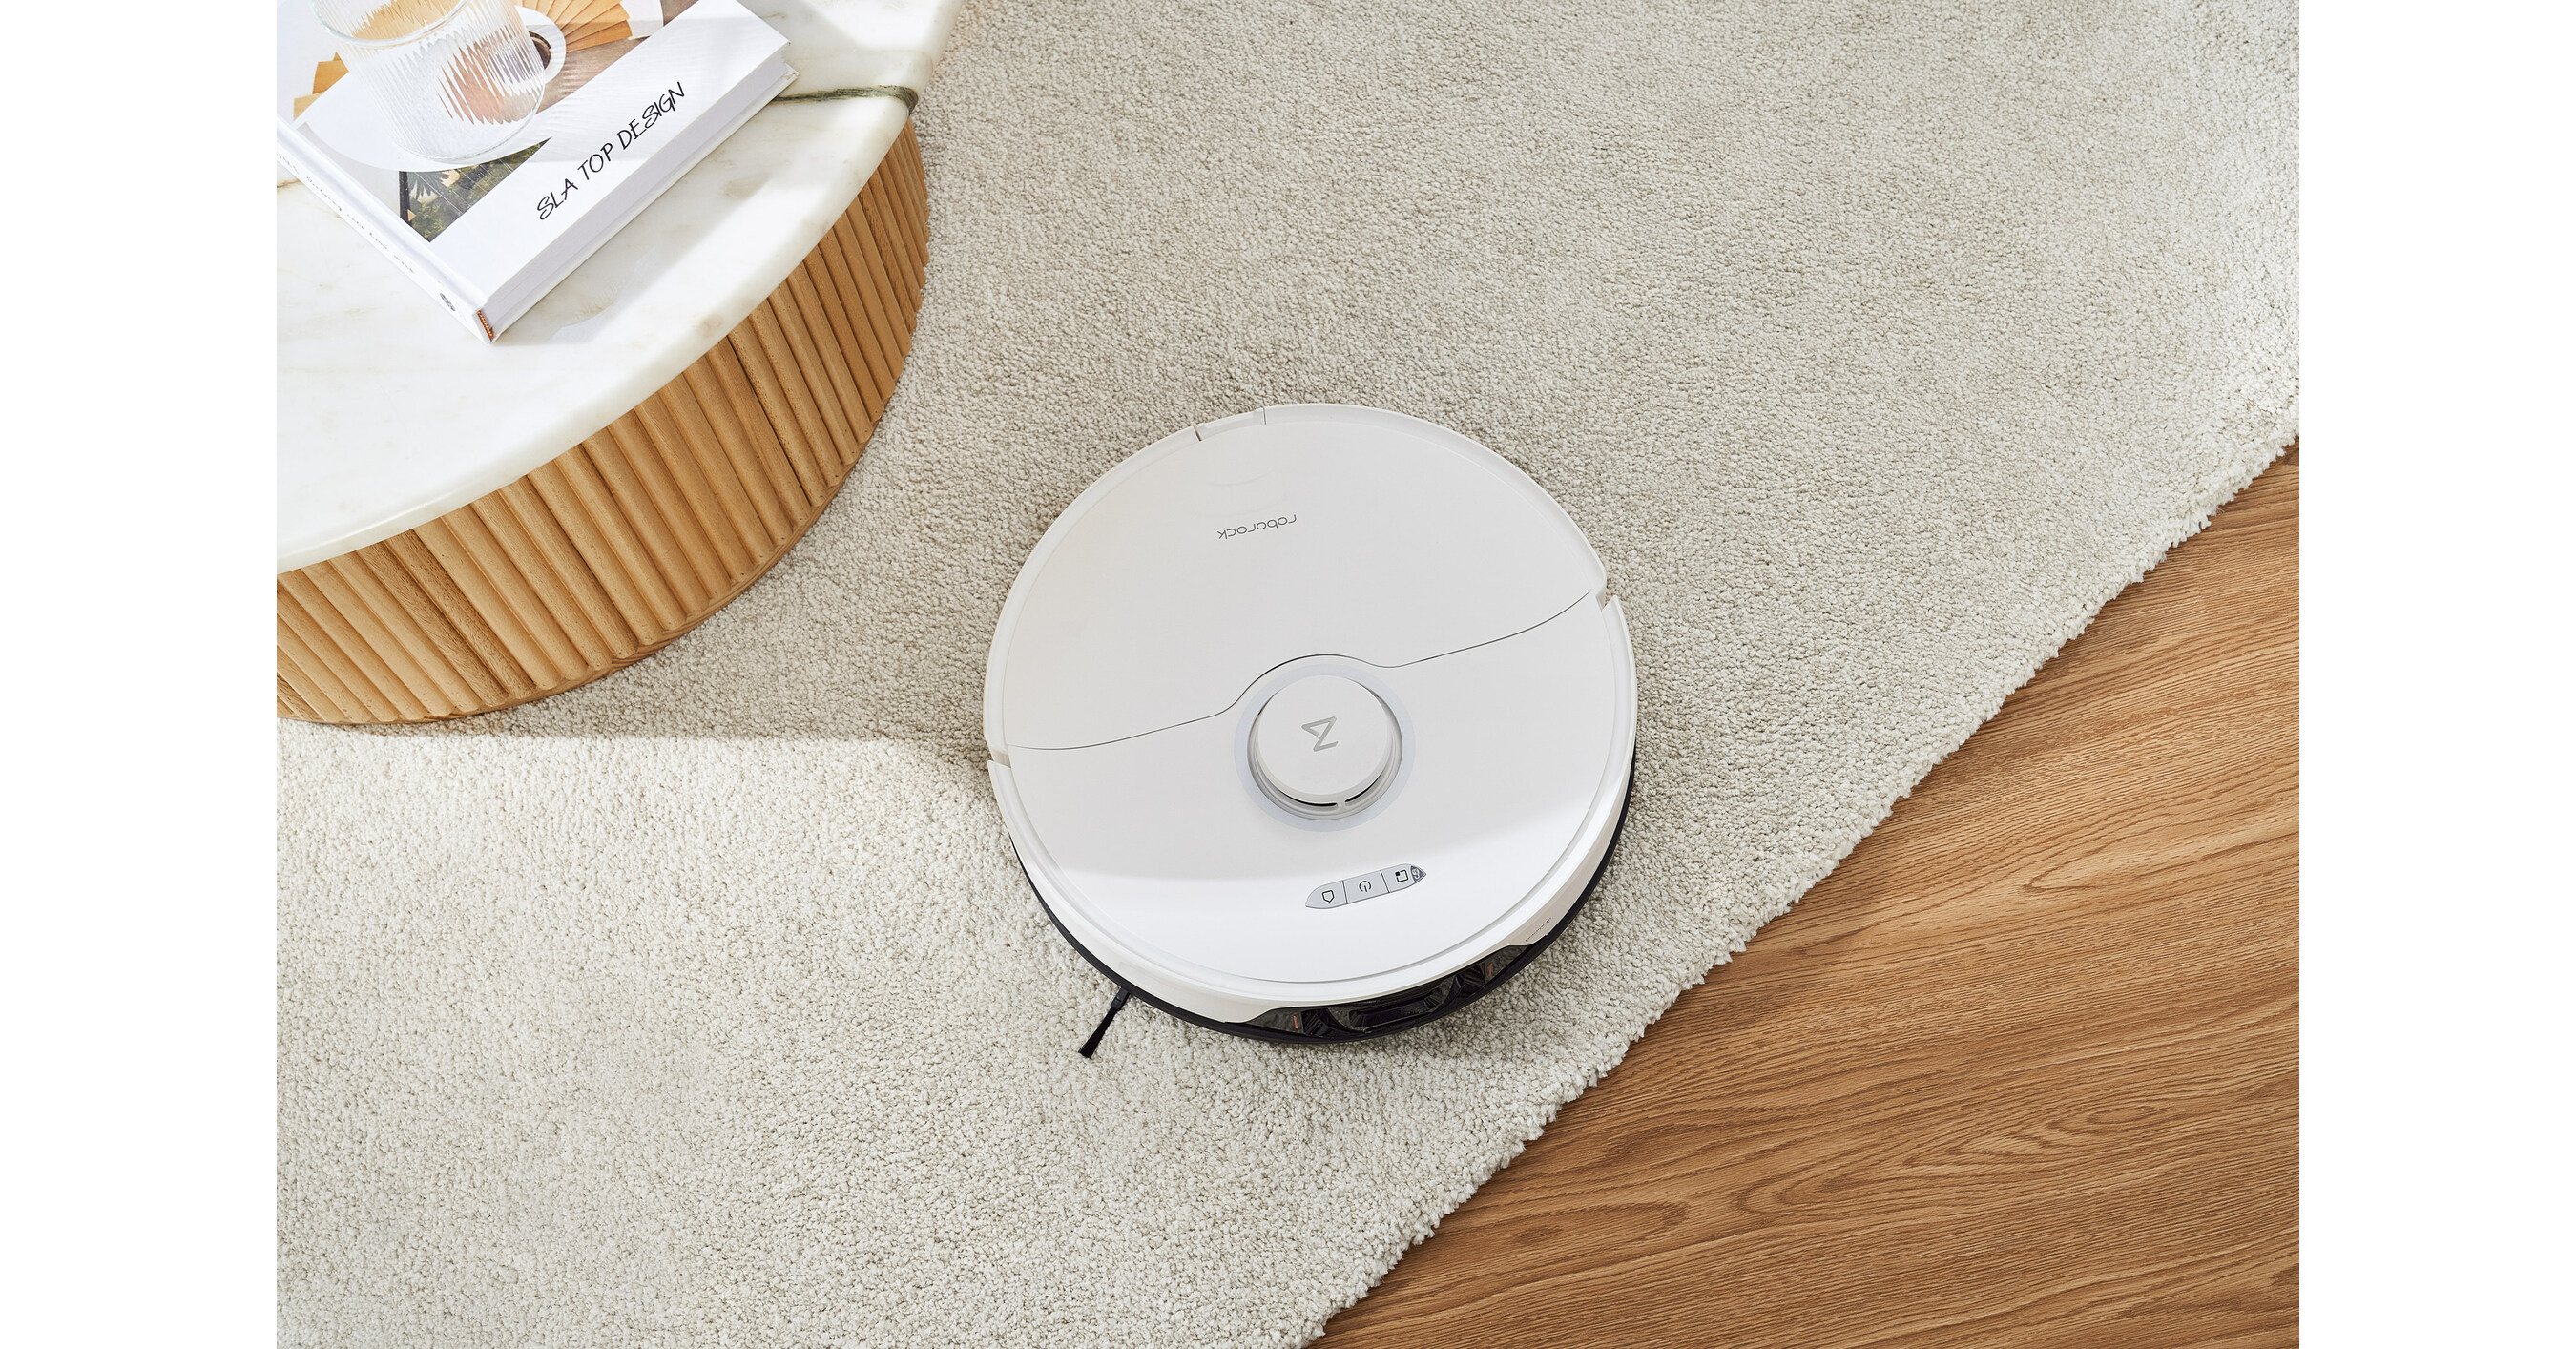 Roborock debuts S8 robot vacuums with the S8 series